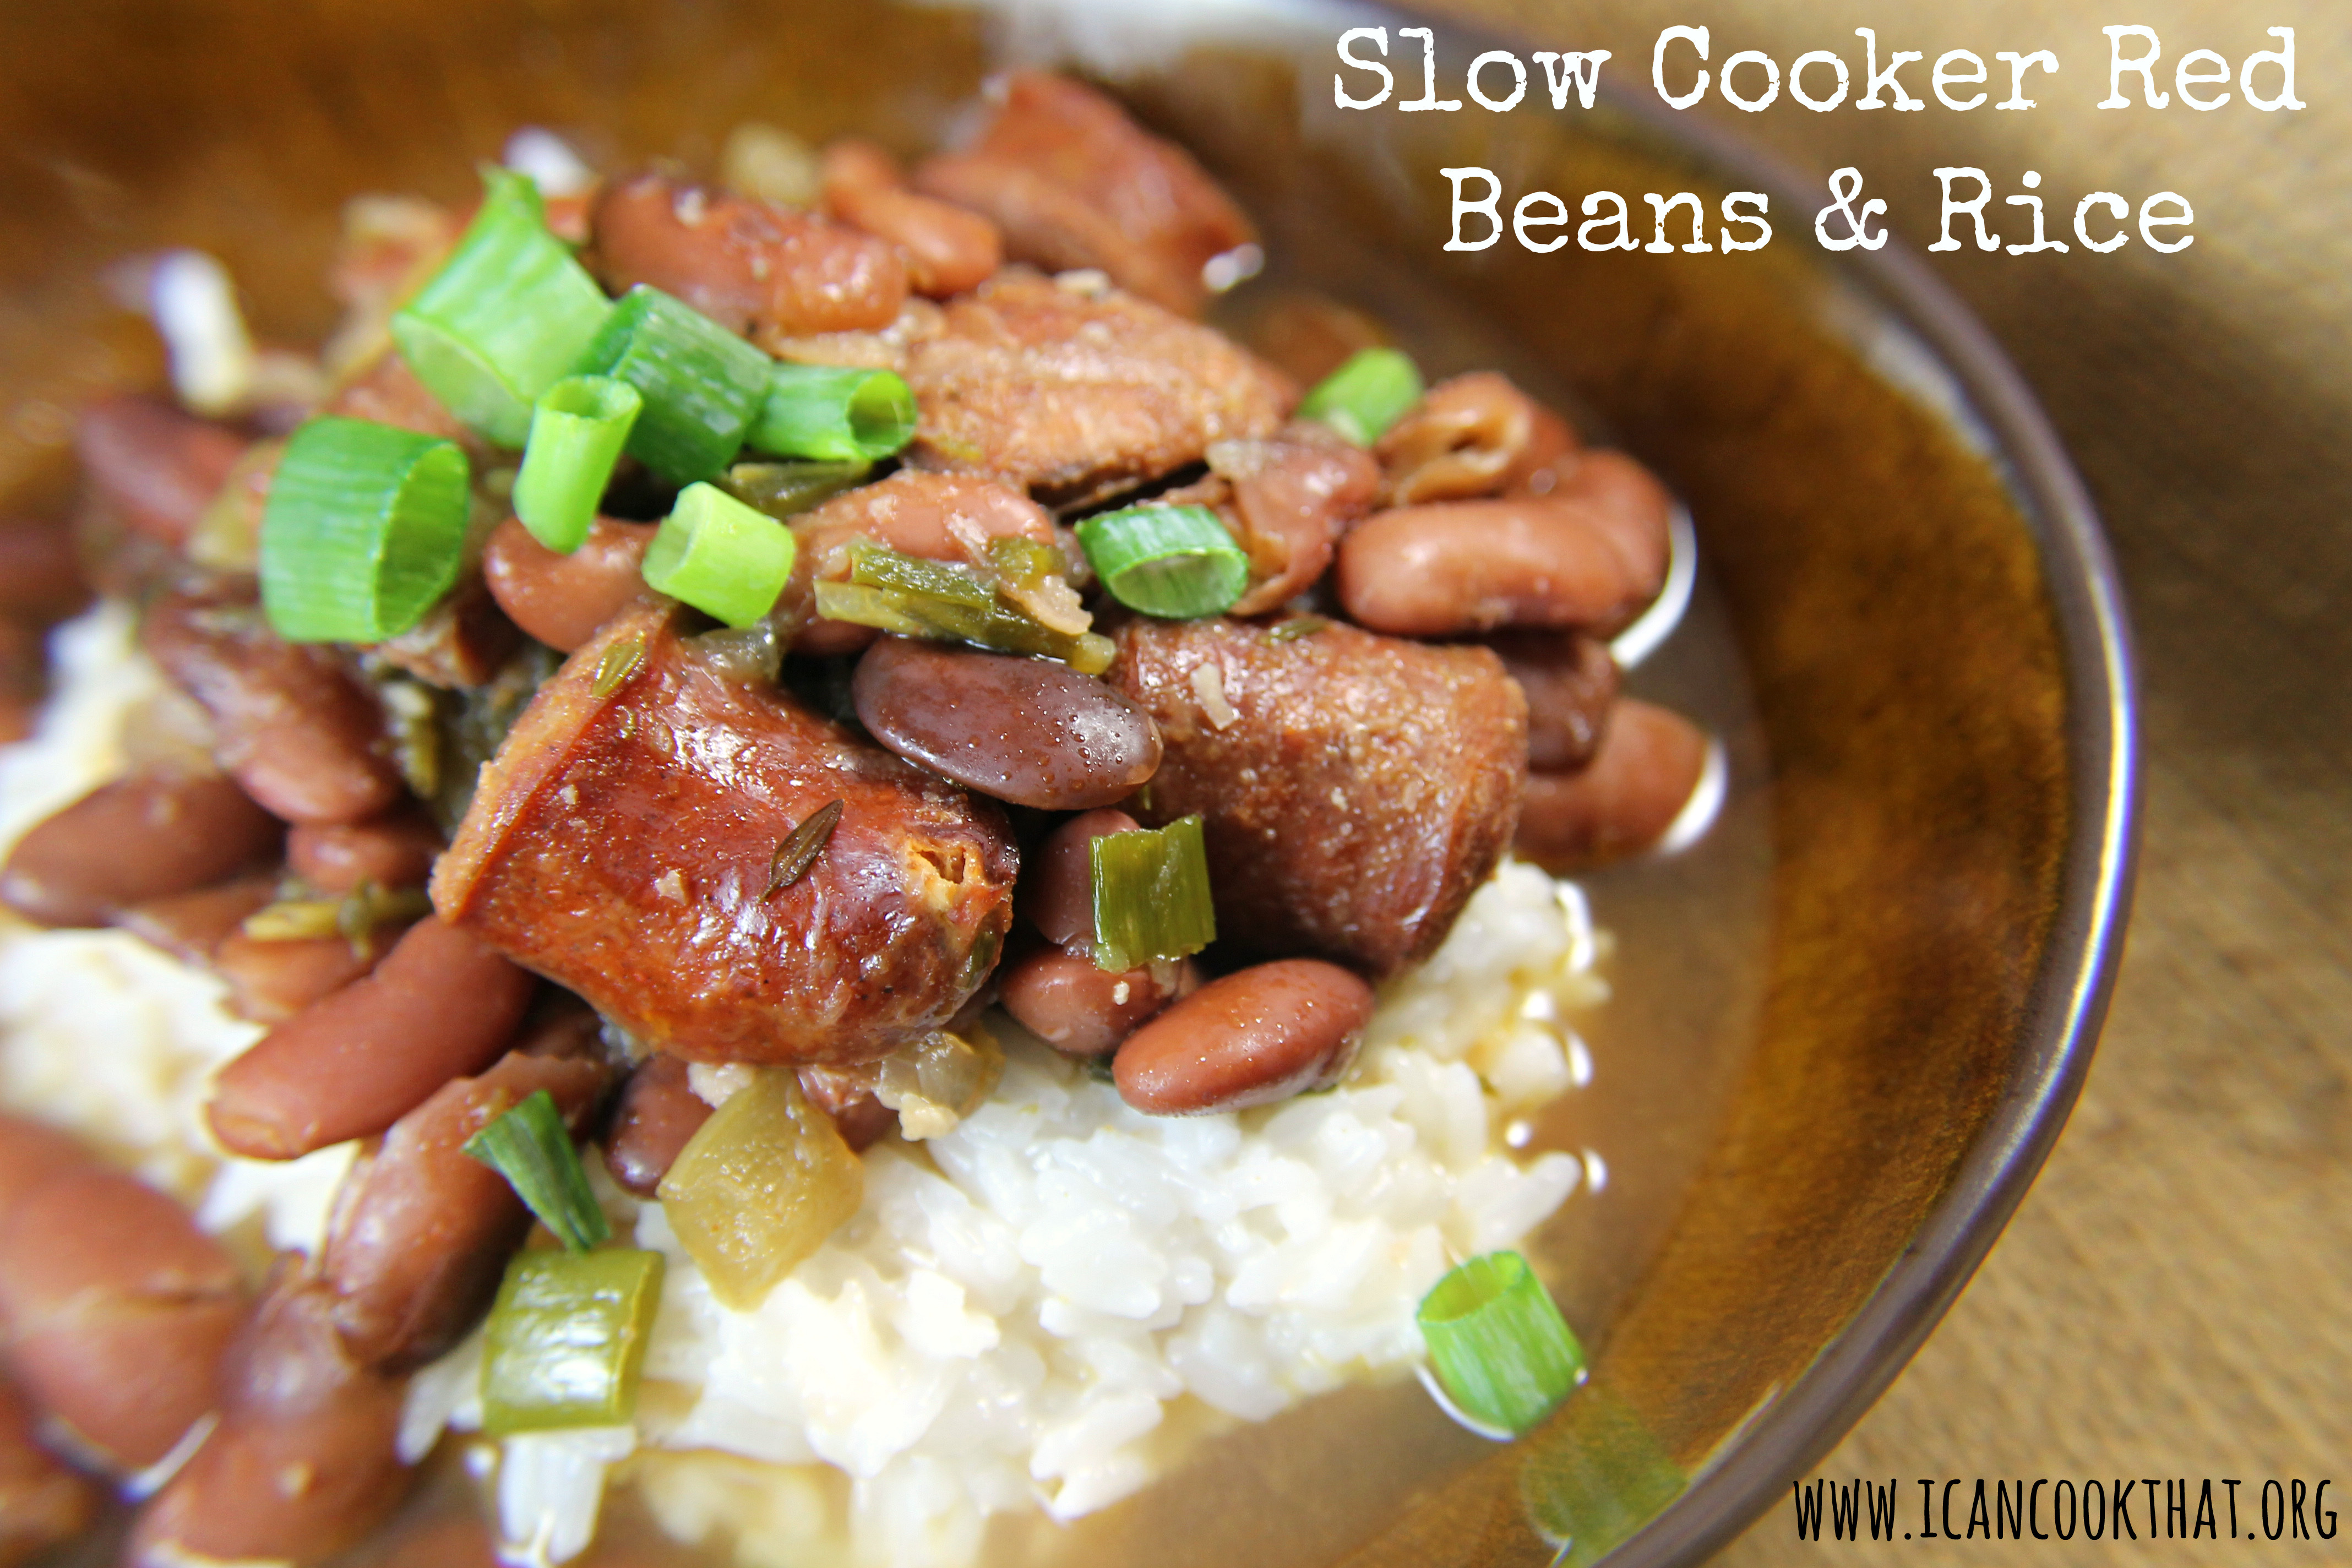 Red Beans And Rice Slow Cooker
 Slow Cooker Red Beans and Rice Recipe